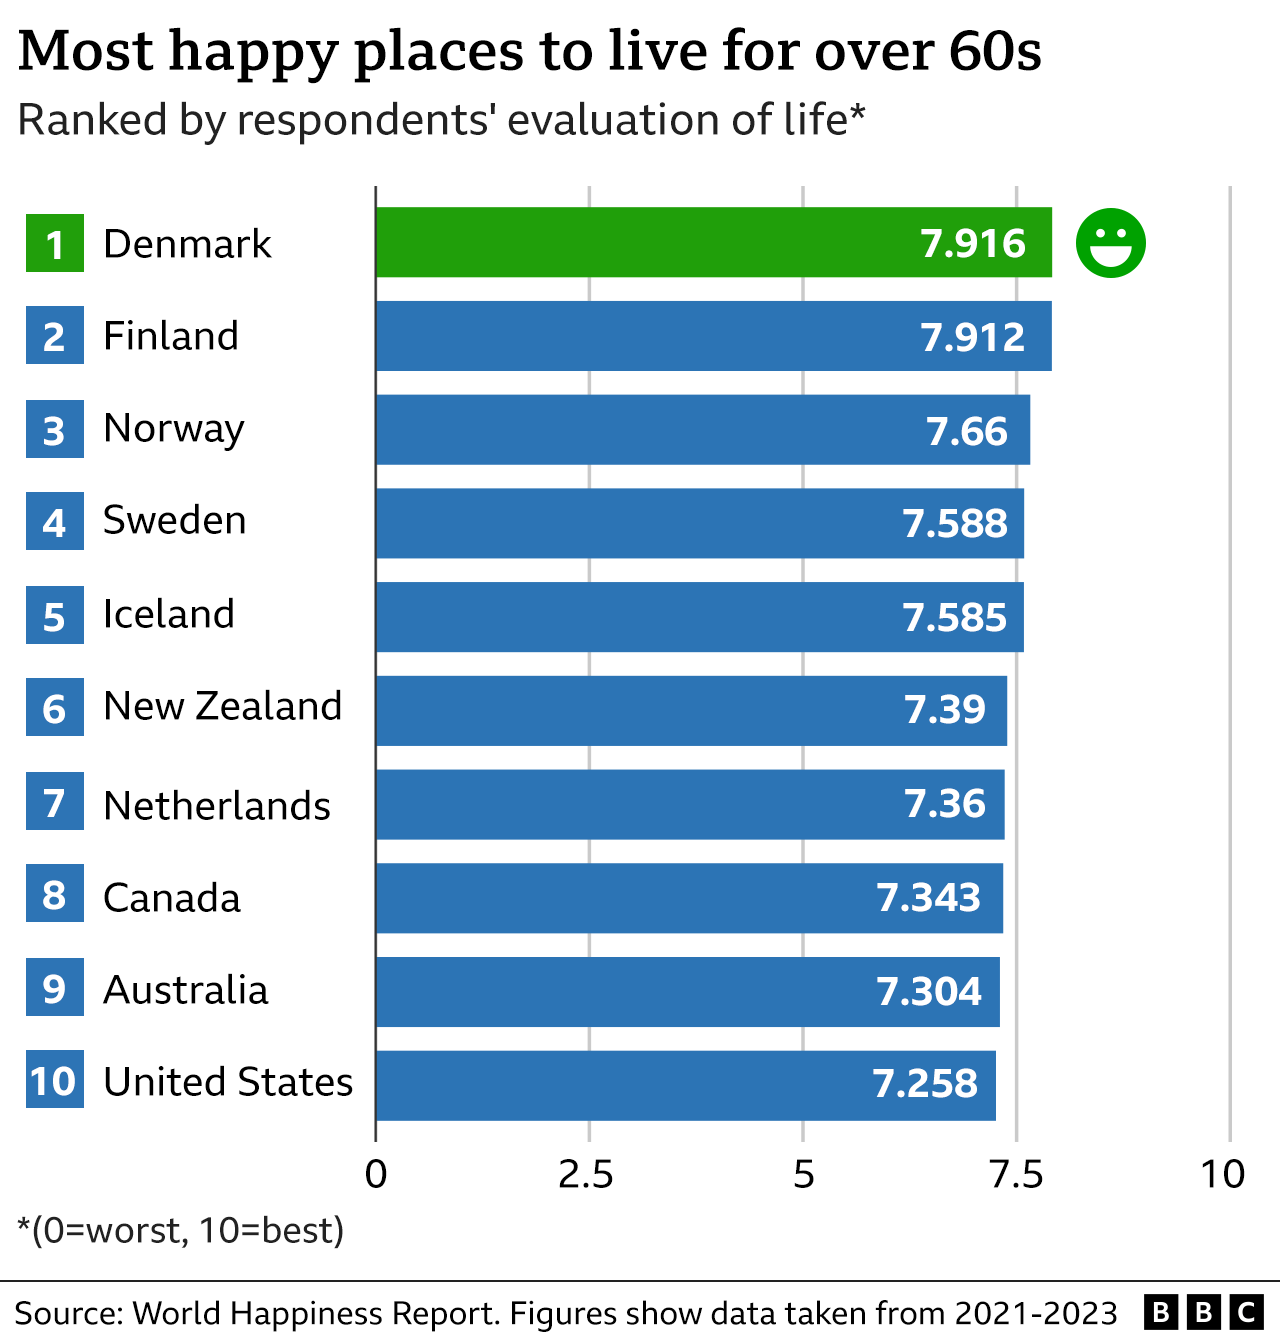 A graph shows the top ten happiest countries for 60+: Denmark, Finland, Norway, Sweden, Iceland, New Zealand, the Netherlands, Canada, Australia and the US